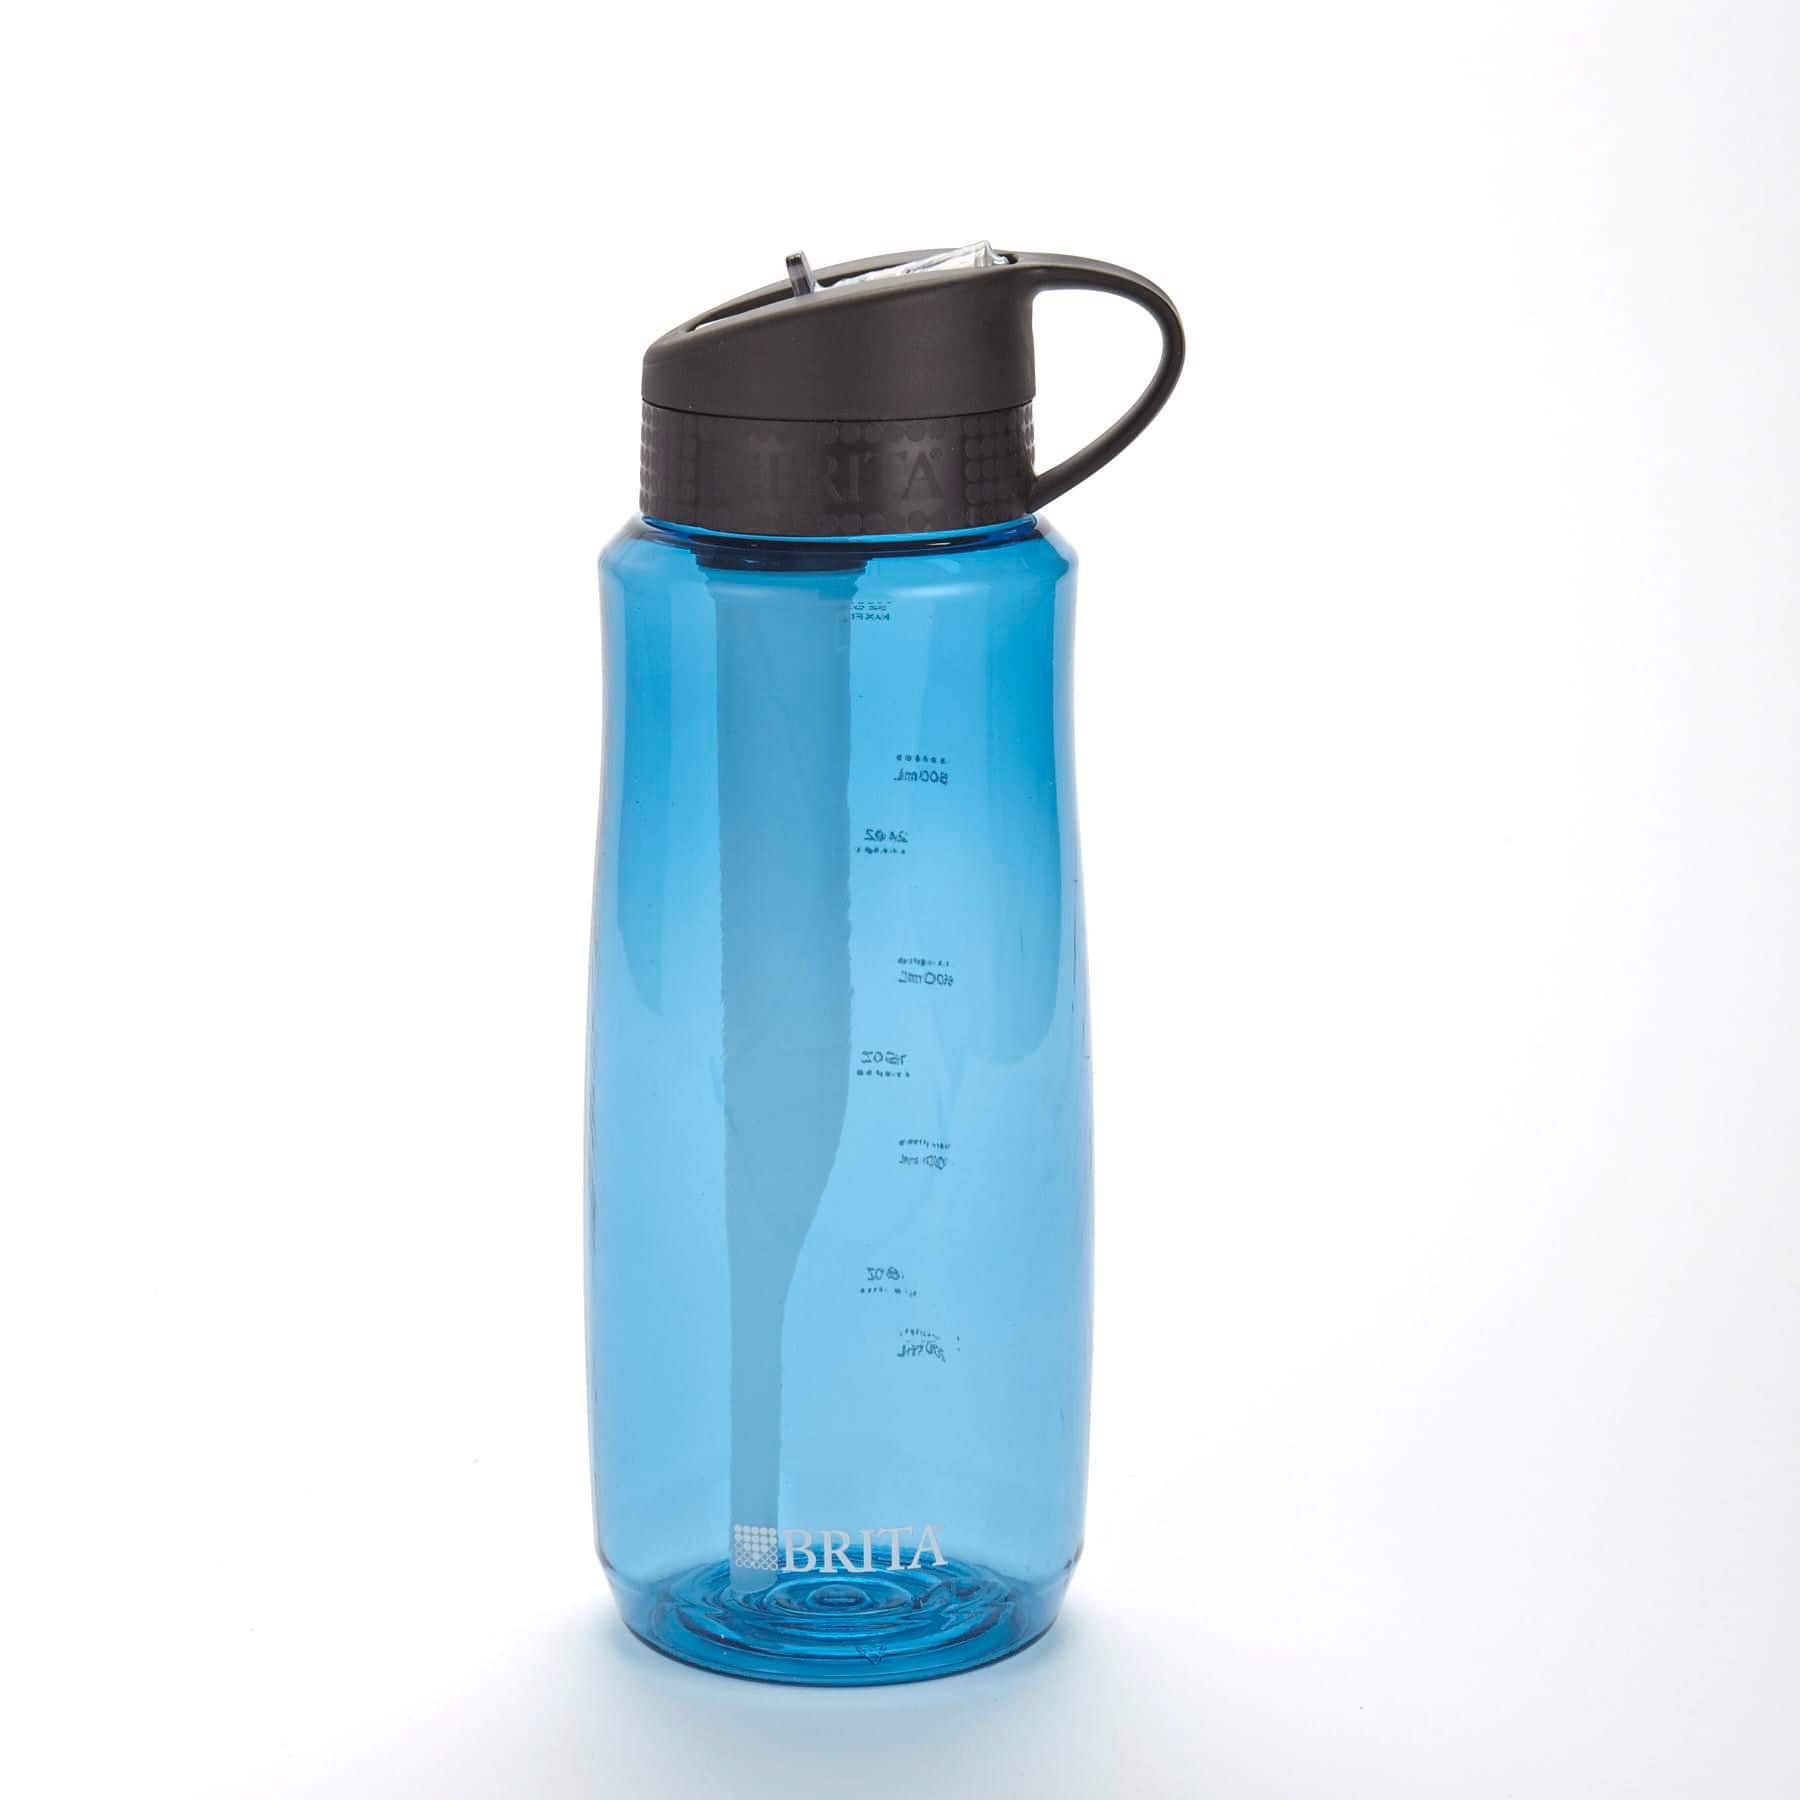 https://media-www.canadiantire.ca/product/living/kitchen/white-goods/1424537/brita-hard-sided-water-bottle-large-75c2a2e6-a726-4ae8-89c1-dbeb93a67ace-jpgrendition.jpg